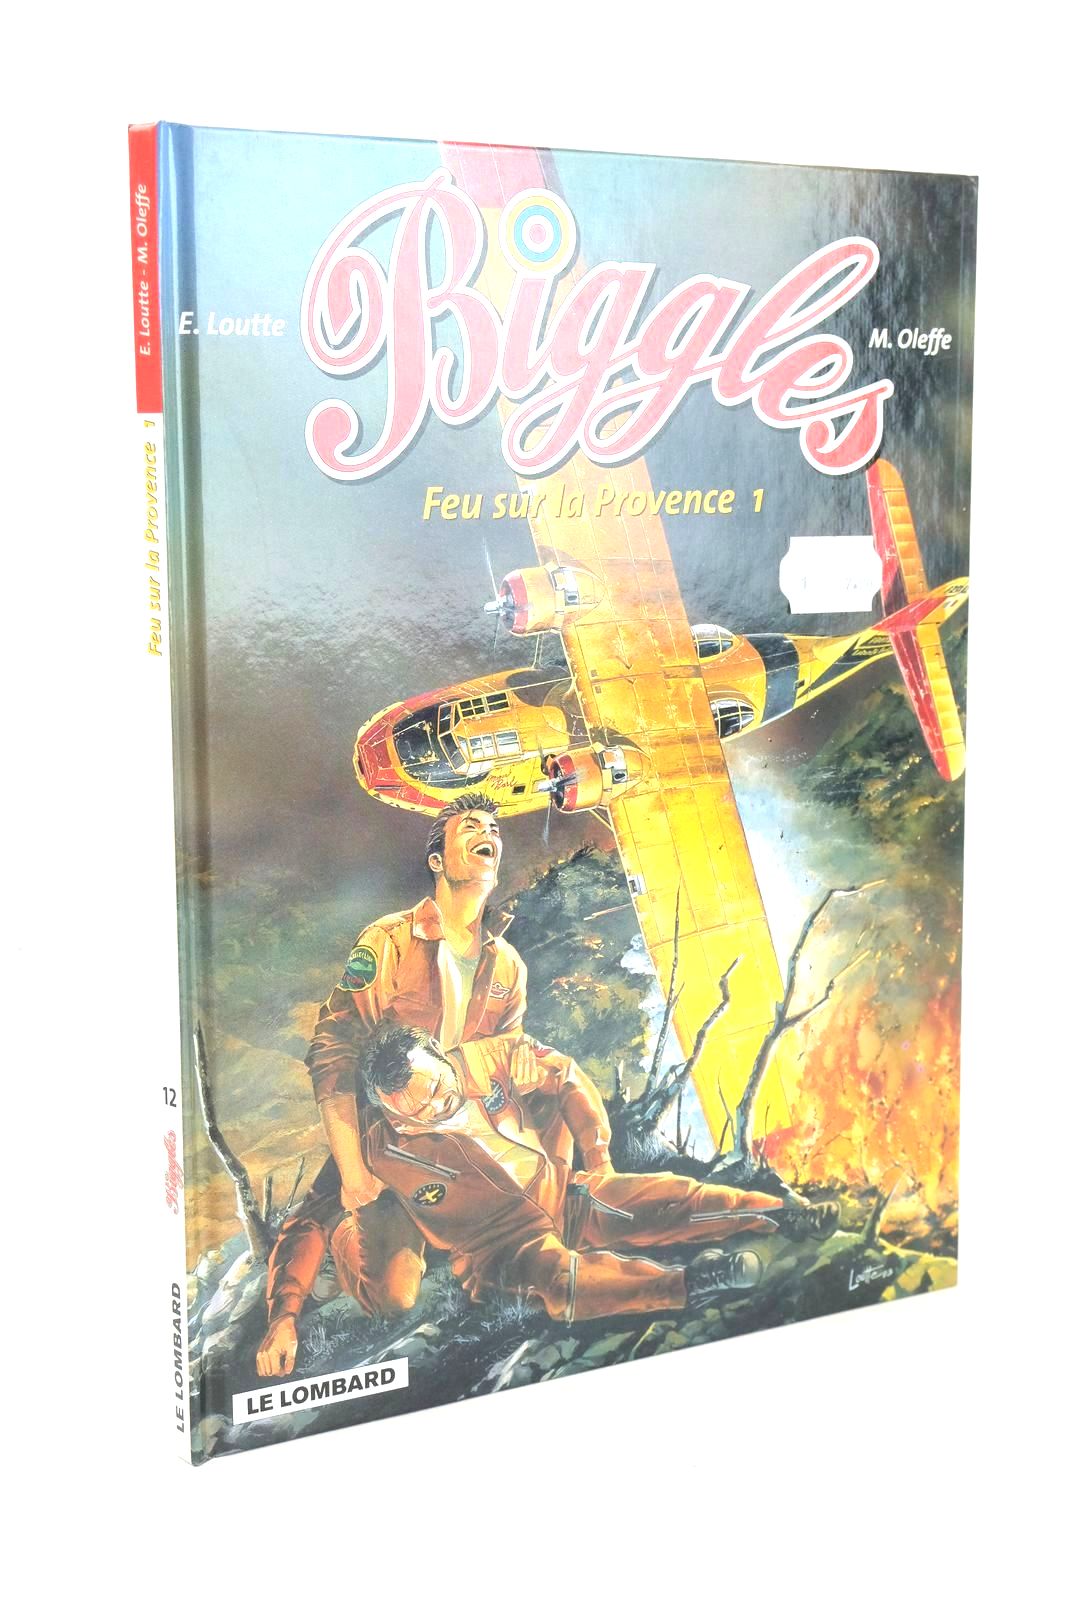 Photo of BIGGLES FEU SUR LA PROVENCE 1 written by Johns, W.E. Oleffe, Michel illustrated by Loutte, Eric published by Editions Du Lombard (STOCK CODE: 1326326)  for sale by Stella & Rose's Books